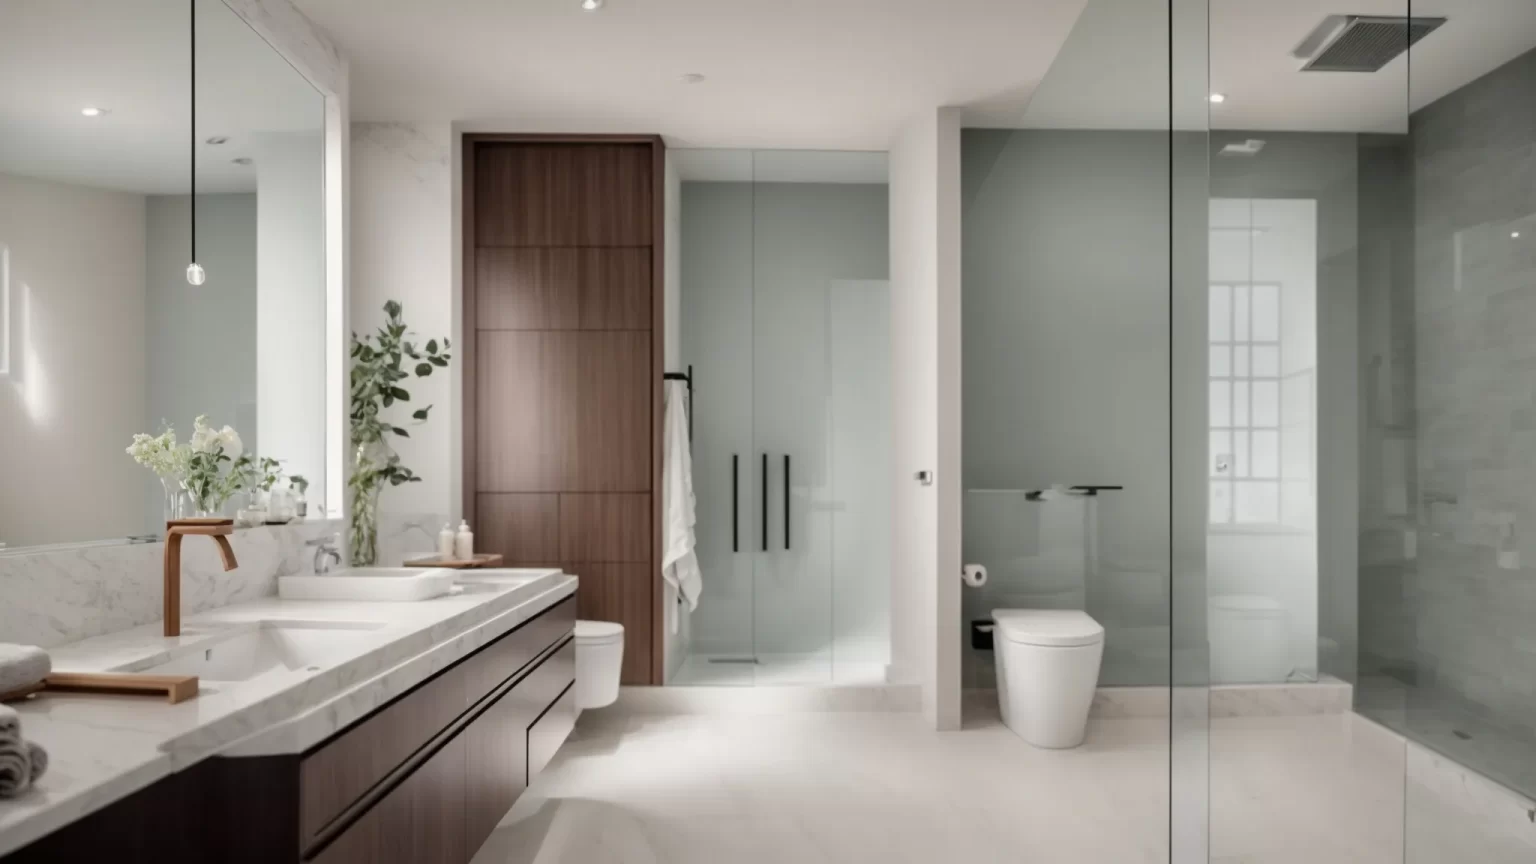 Finding the right design style for your bathroom renovation in Barrie